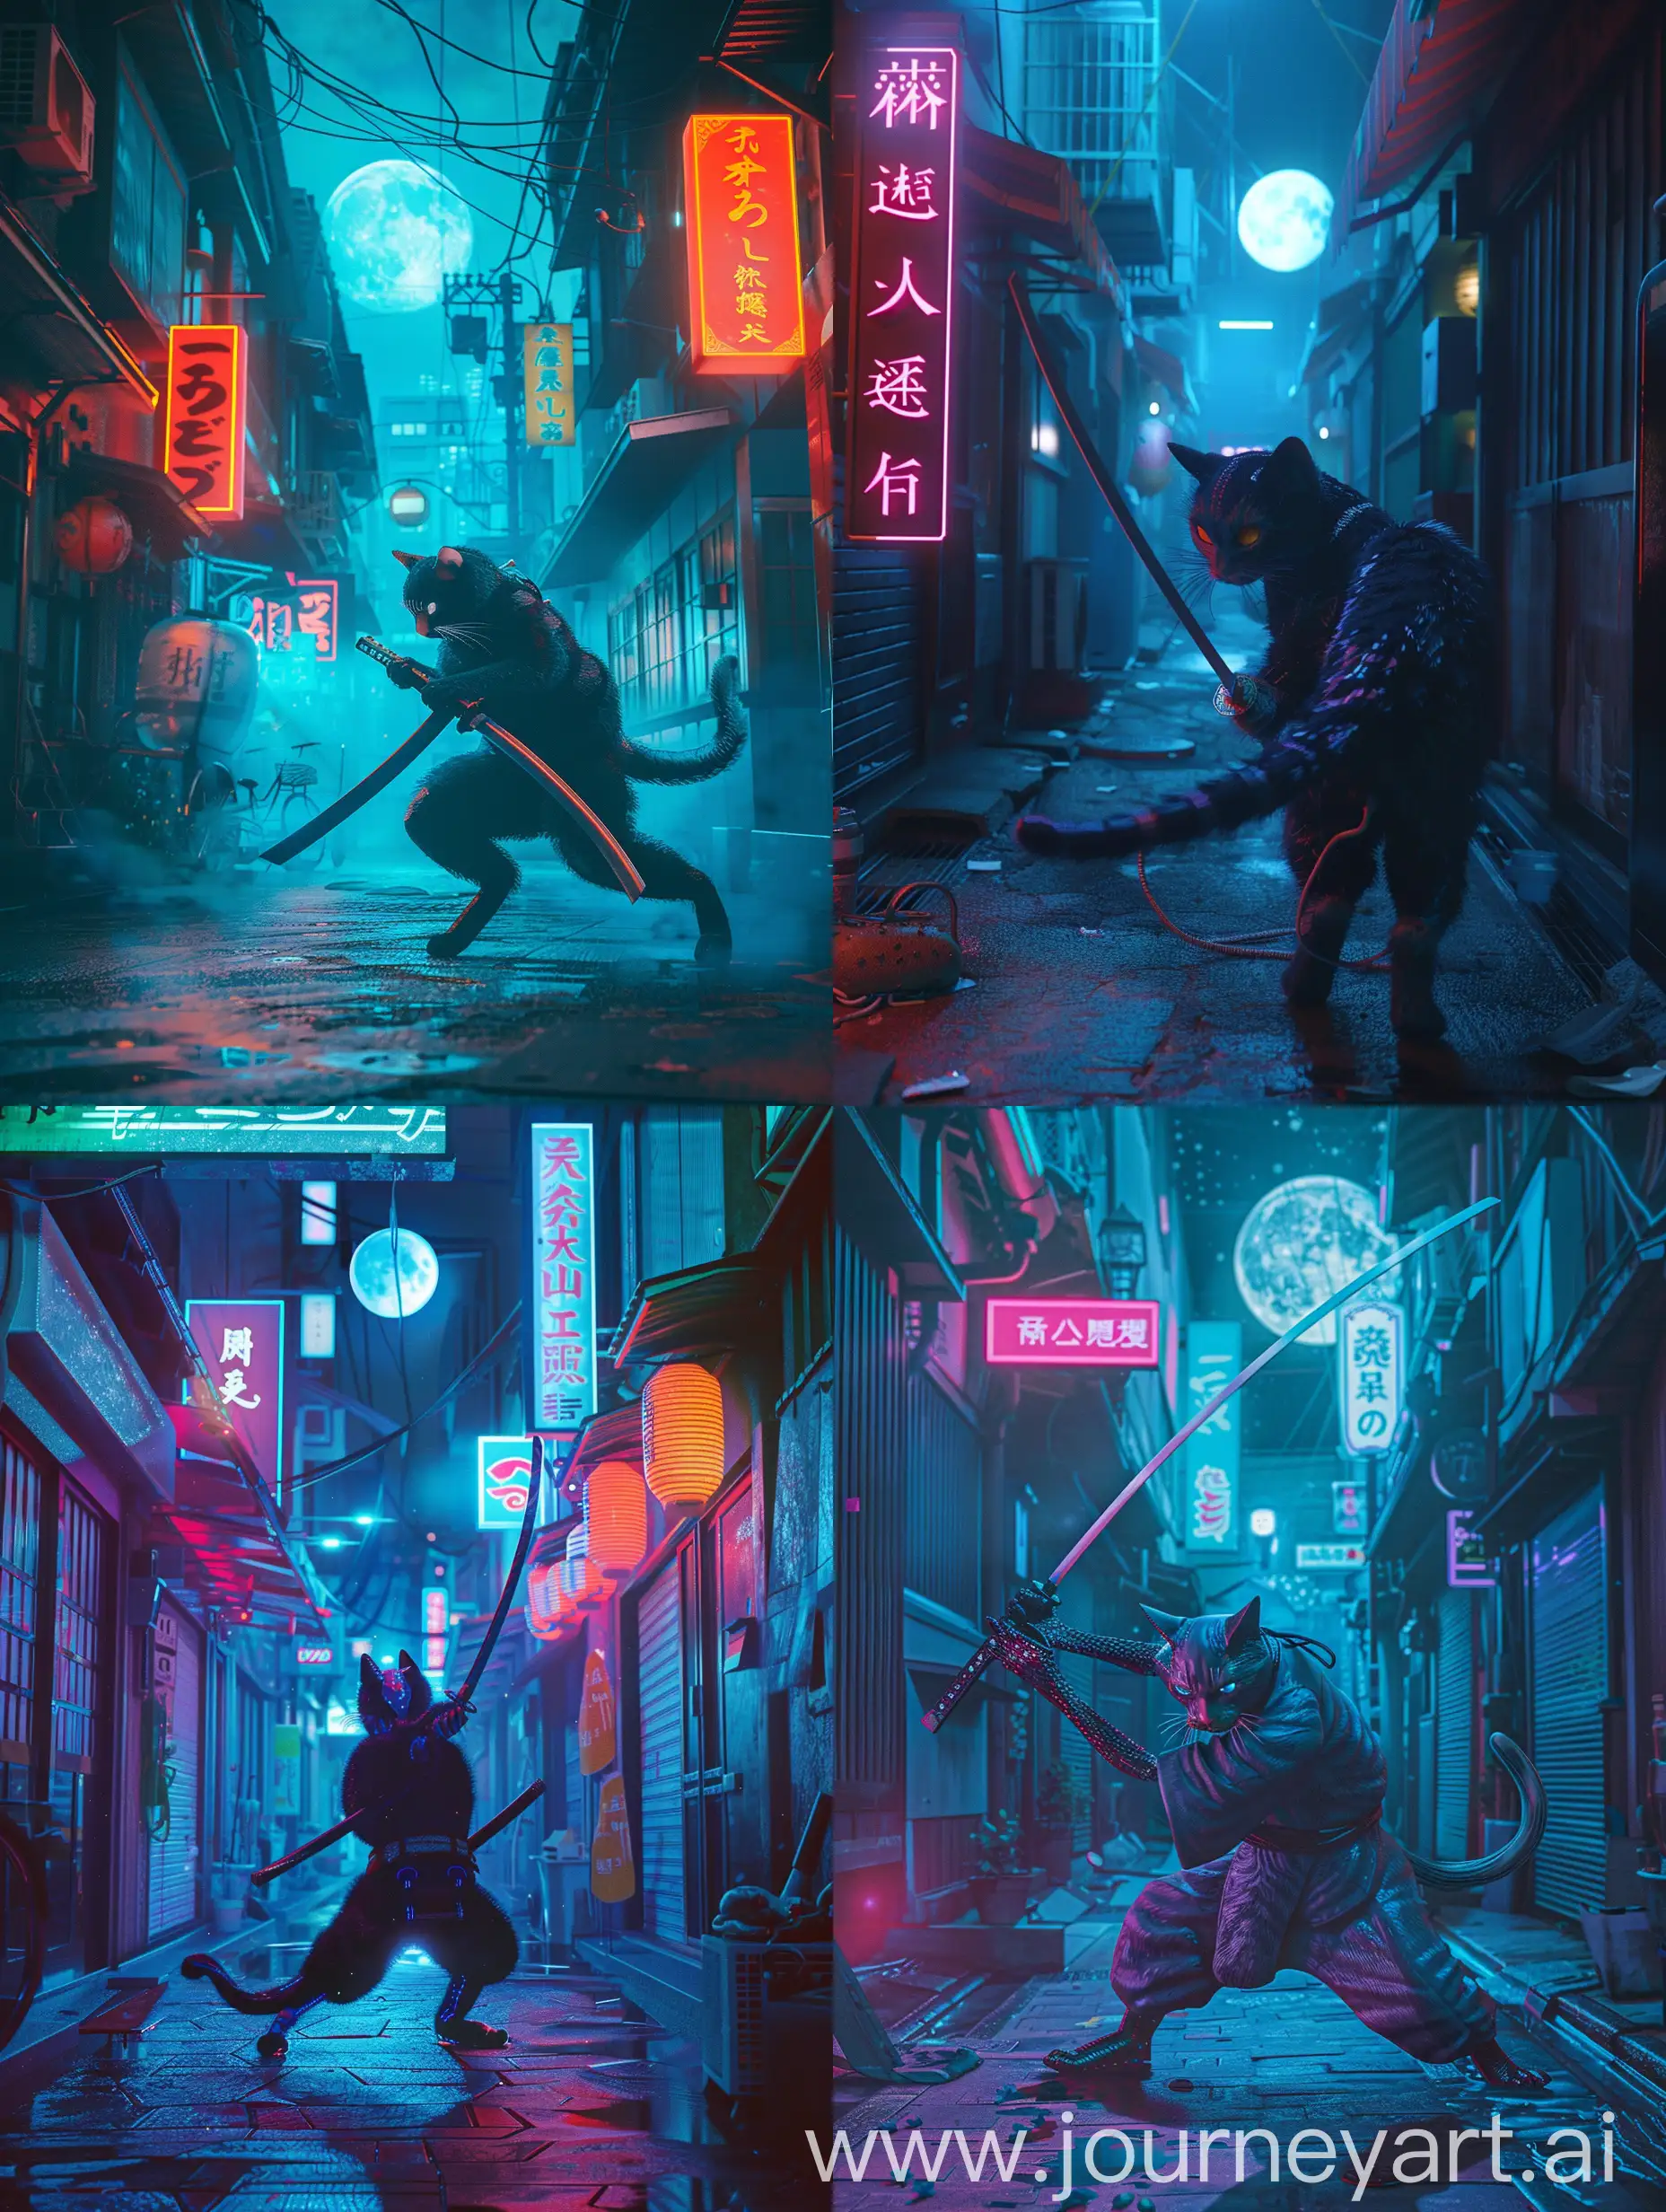 japanese futuristic bladerunner 2044 style, a cyberpunk cat ninja action with katana sword  in a pristinely clean urban alley, at night with afull moon, and lit by neon signs in japanese